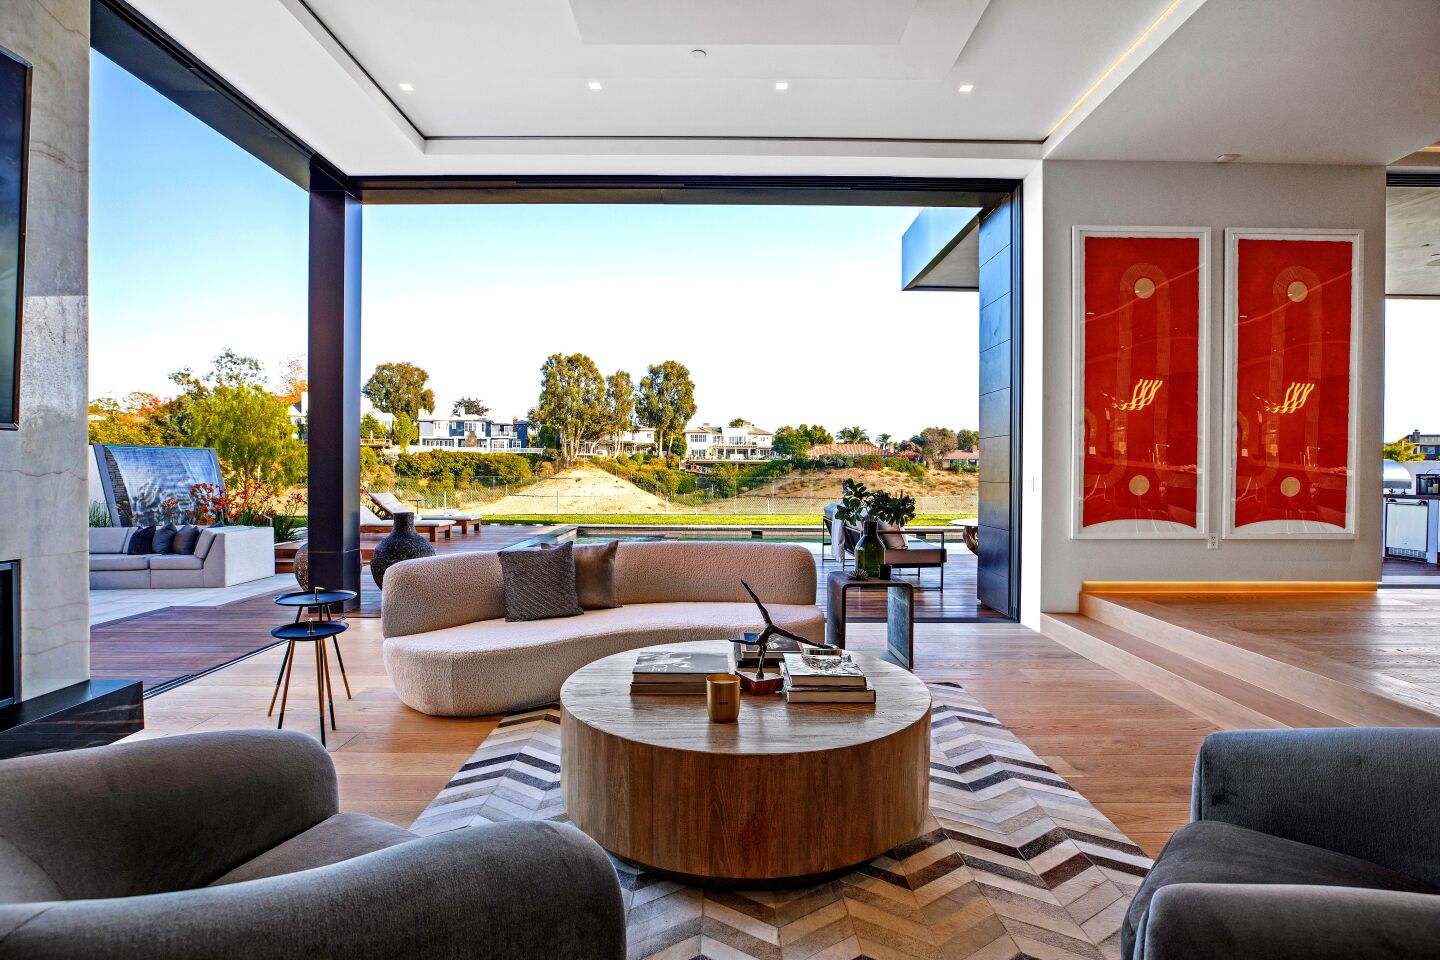 Views of the outdoors through expansive glass walls.